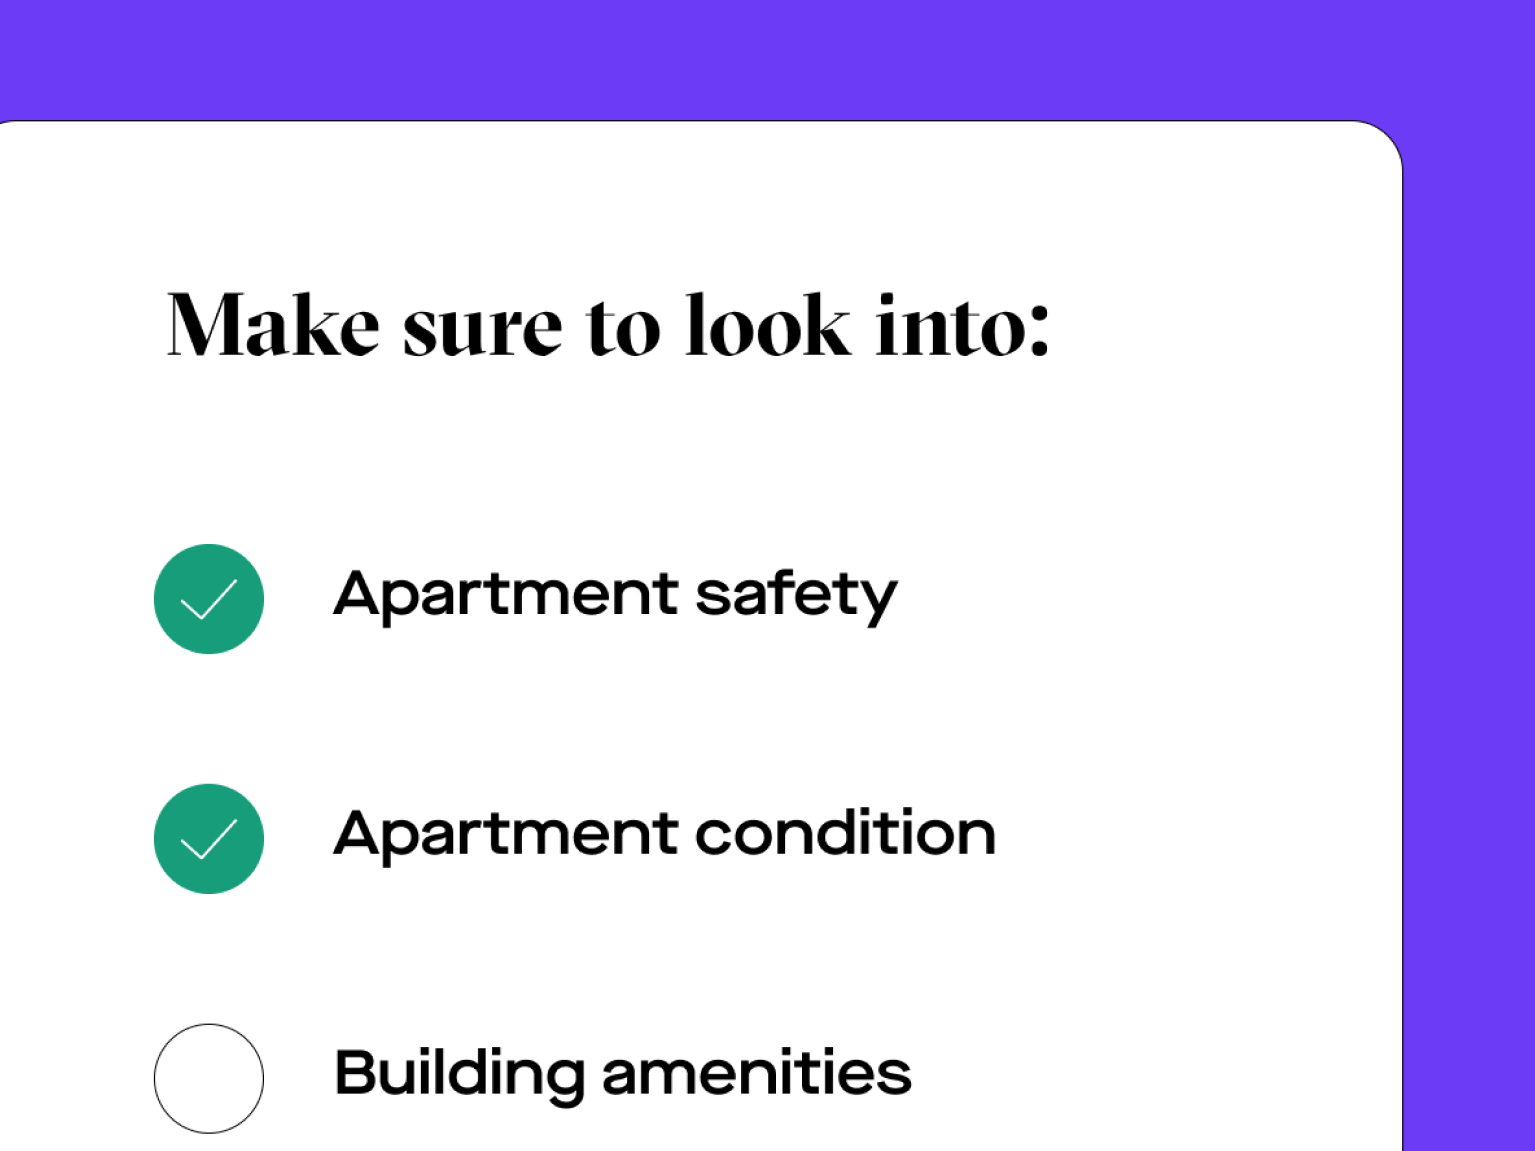 Hero - Apartment Tour Checklist Graphic - "Make sure to look into: Apartment safety, Apartment condition, Building amenities"